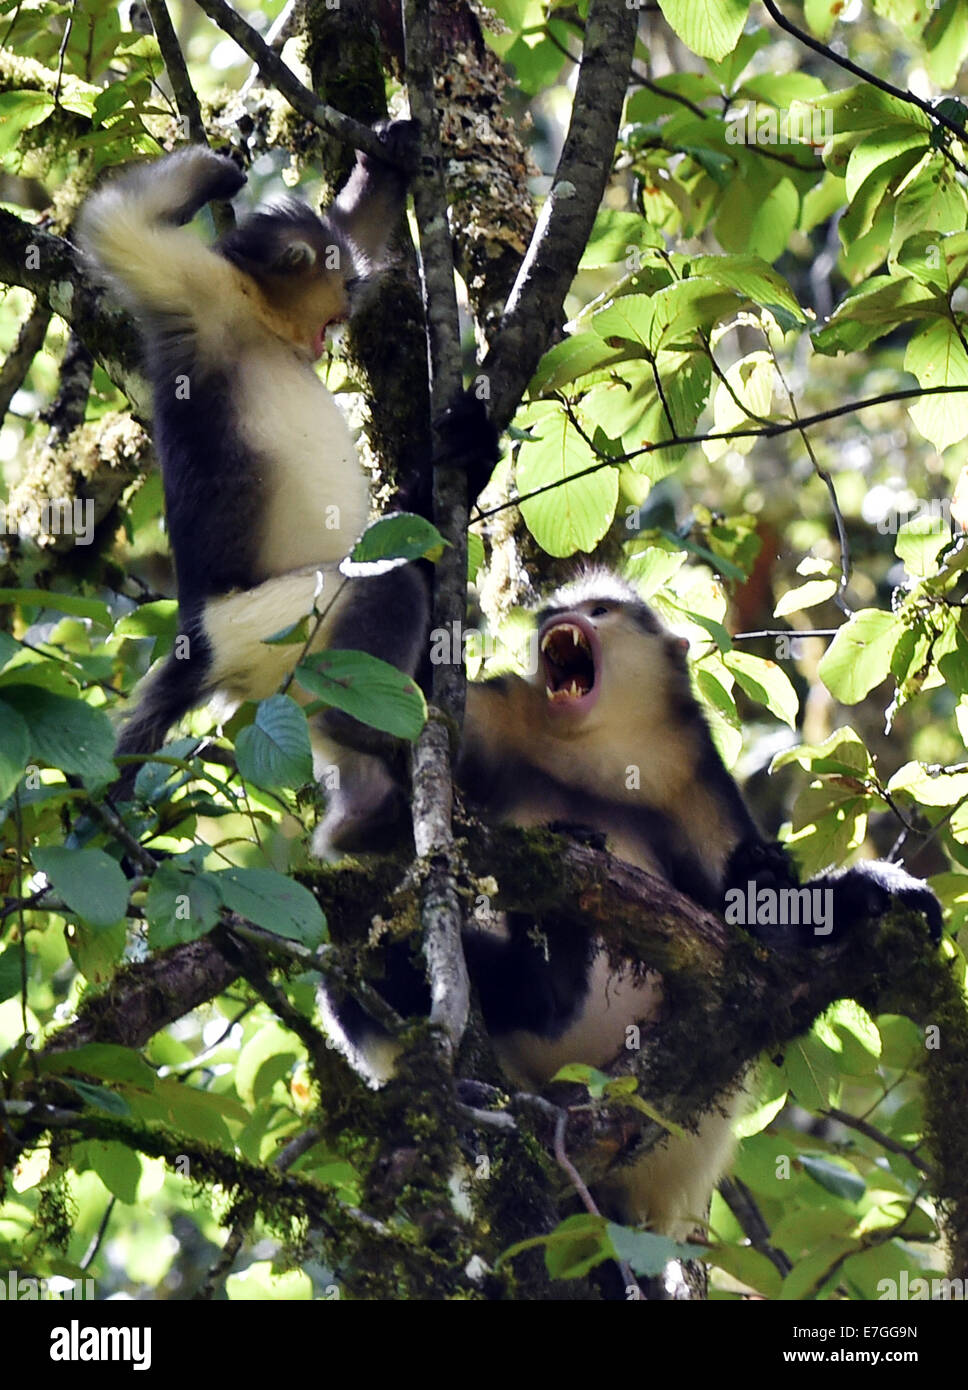 Dequn, Yunnan, China. 17th September, 2014. Two black snub-nosed monkeys (Rhinopithecus bieti) are seen on a tree branch in the Baimang Mountain National Natural Reserve in the Tibetan Autonomous Prefecture of Deqen in southwest China's Yunnan Province, Sept. 16, 2014. The population of black snub-nosed monkeys within the Baimang Mountain National Natural Reserve has expanded by about 50 as of September. In August 2013, a 5.1-magnitude earthquake in Deqen had exerted adverse effects to the habitats of black snub-nosed monkeys here. Credit:  Xinhua/Alamy Live News Stock Photo